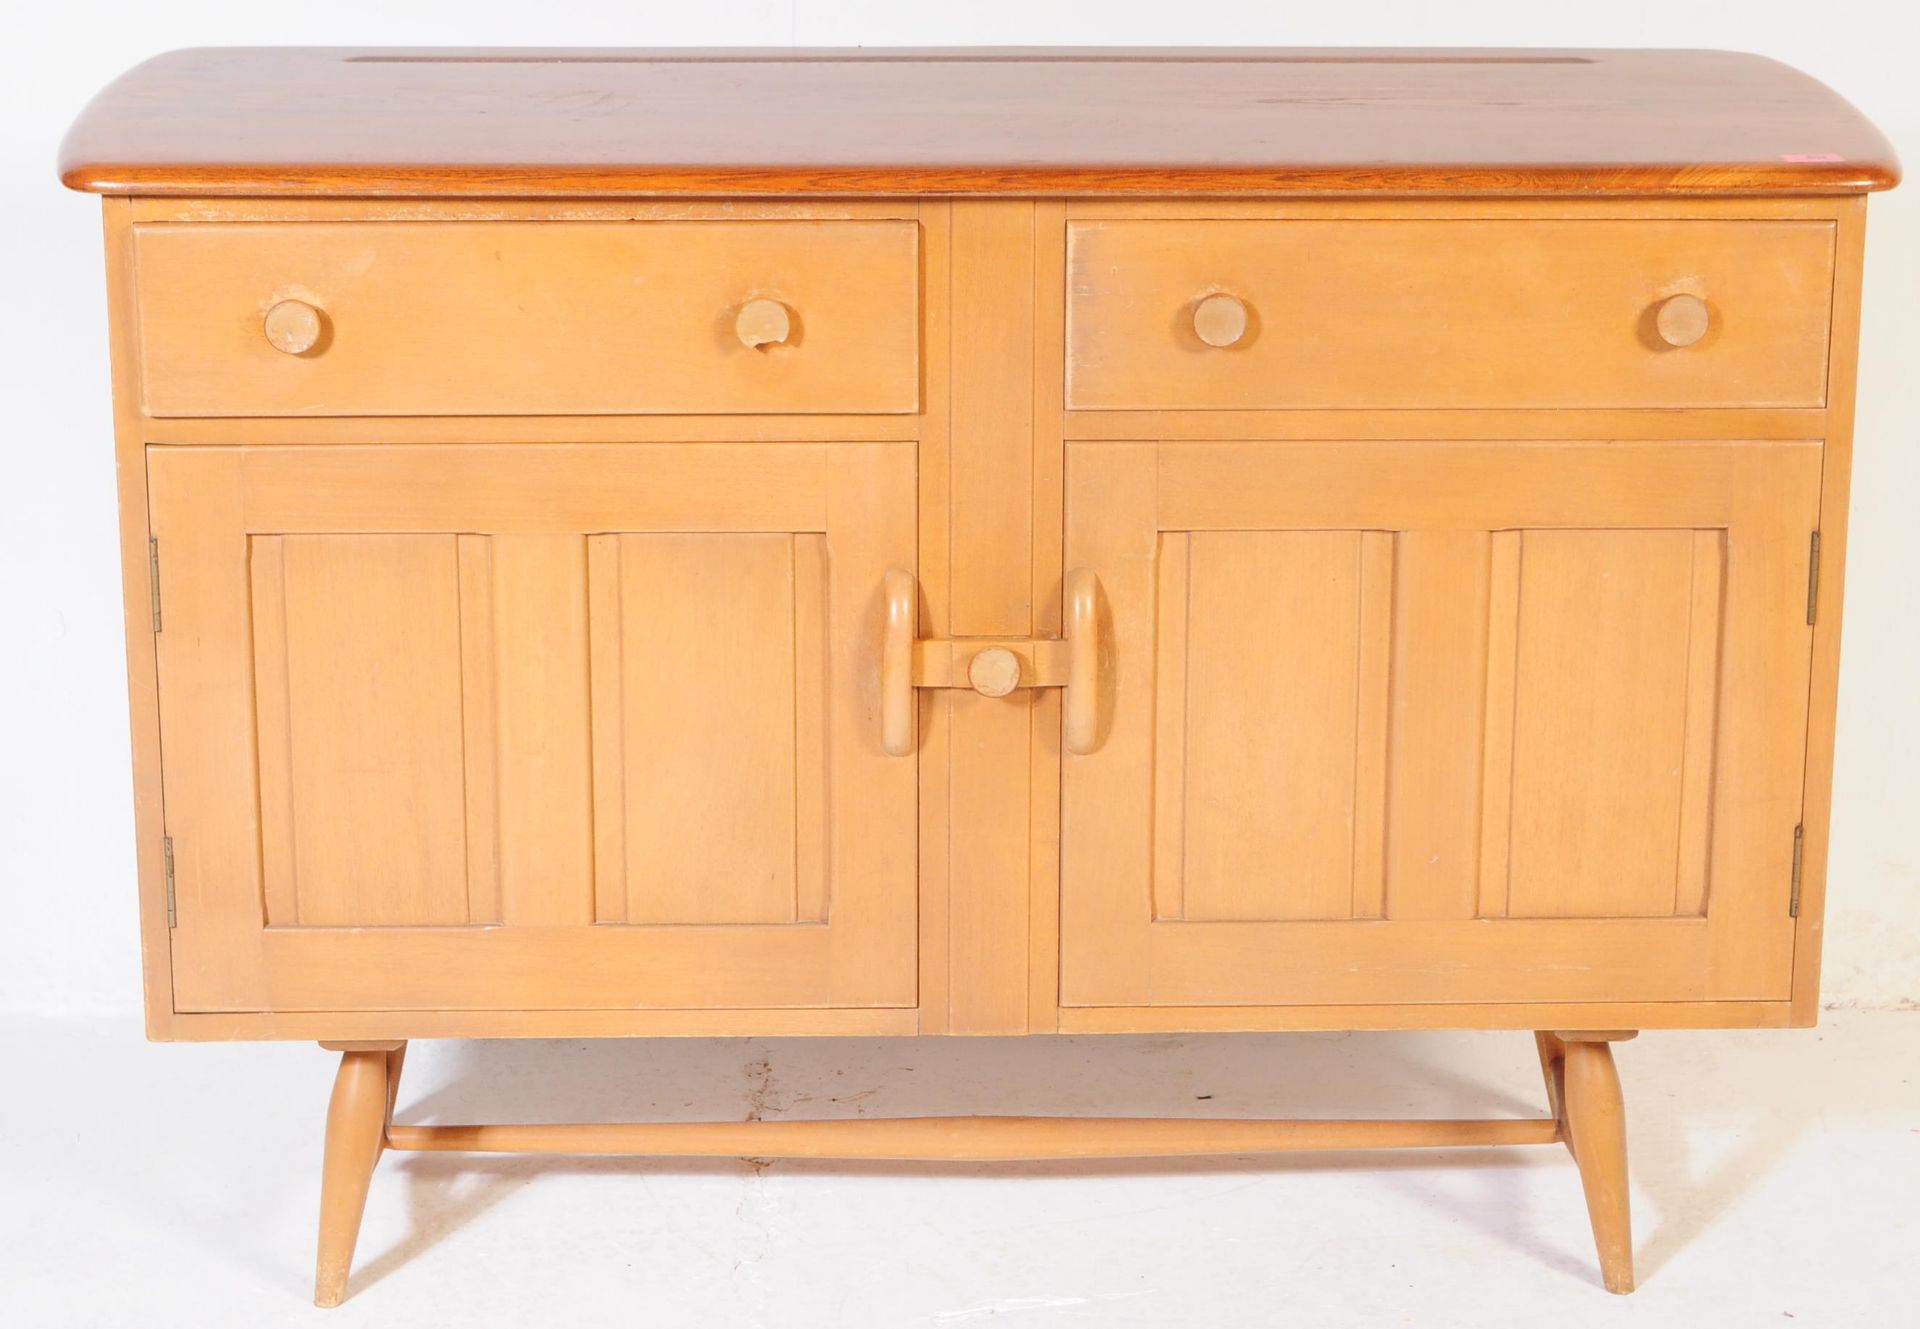 MID CENTURY 1950S ERCOL BLOND BEECH & ELM SIDEBOARD - Image 2 of 7